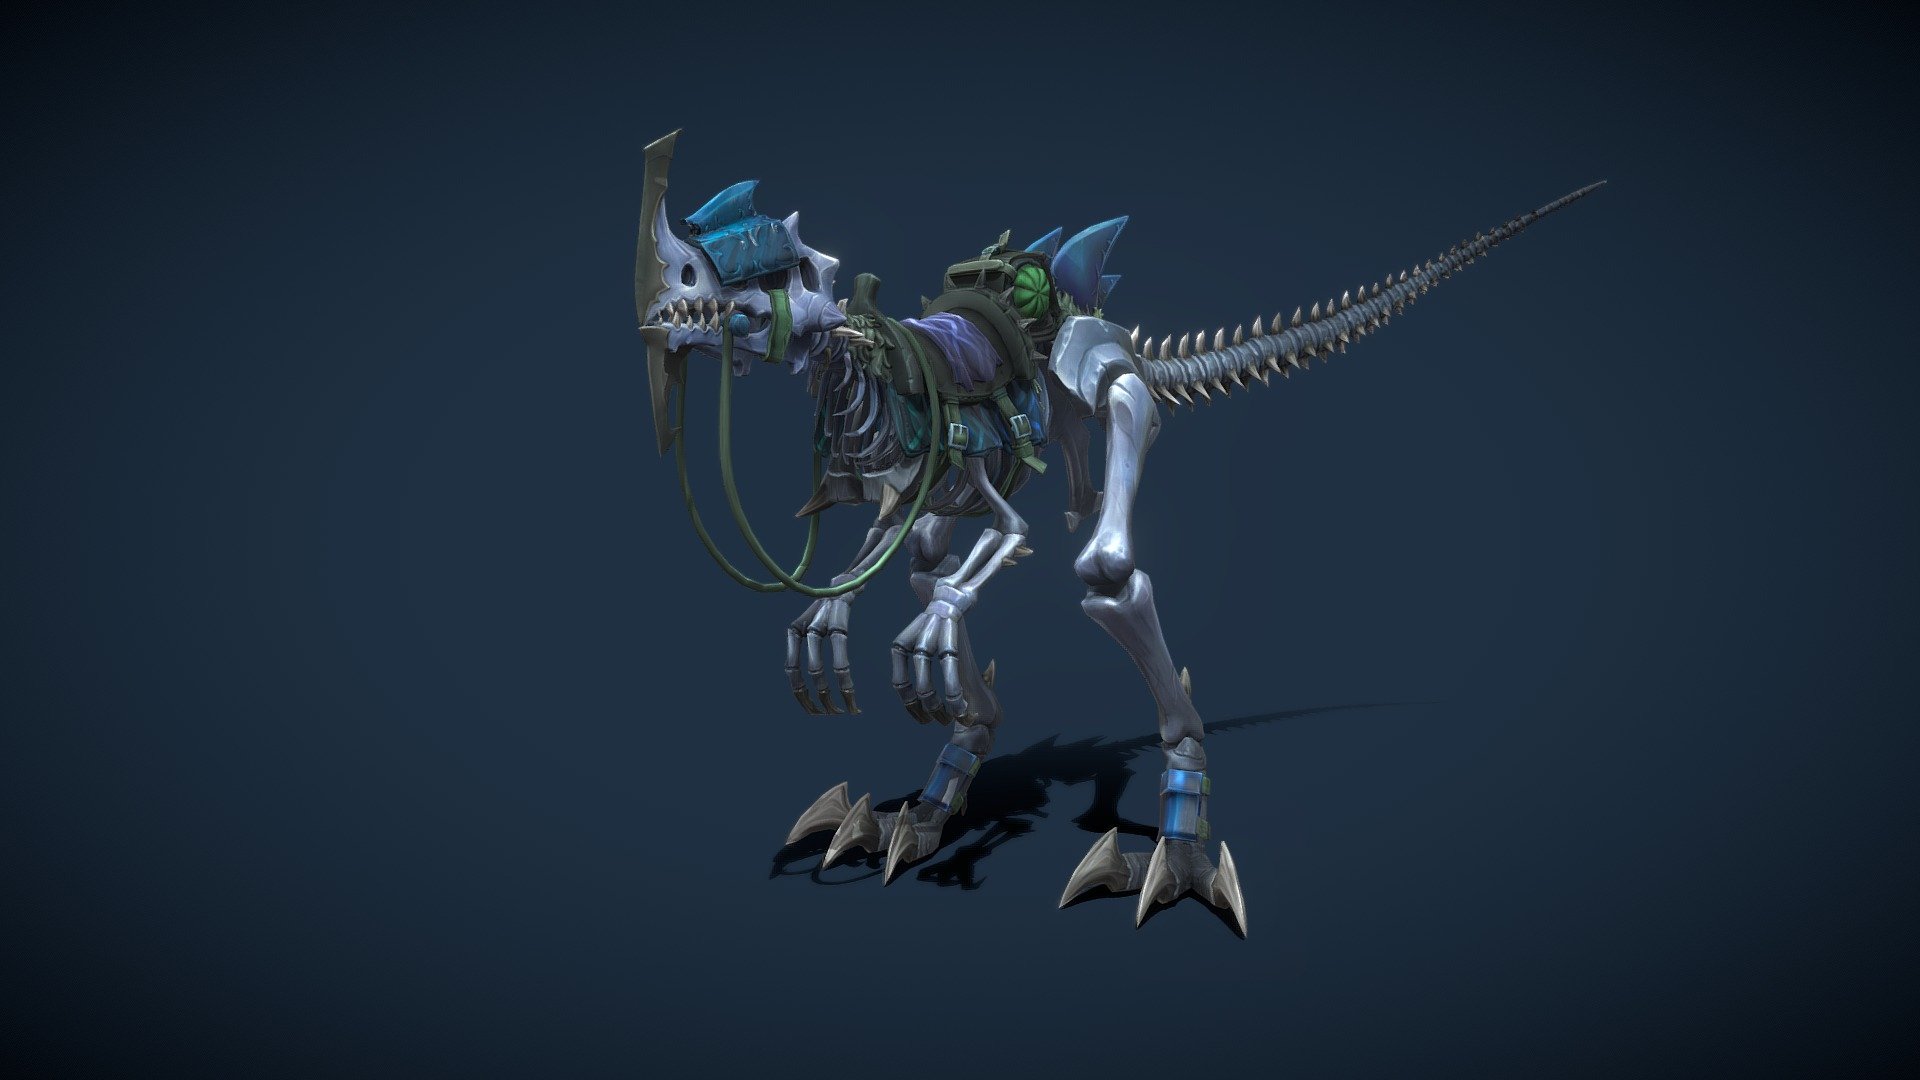 Stylized character for a project.

Software used: Zbrush, Autodesk Maya, Autodesk 3ds Max, Substance Painter - Stylized Fantasy Skeletal Dinosaur (Mount) - 3D model by N-hance Studio (@Malice6731) 3d model